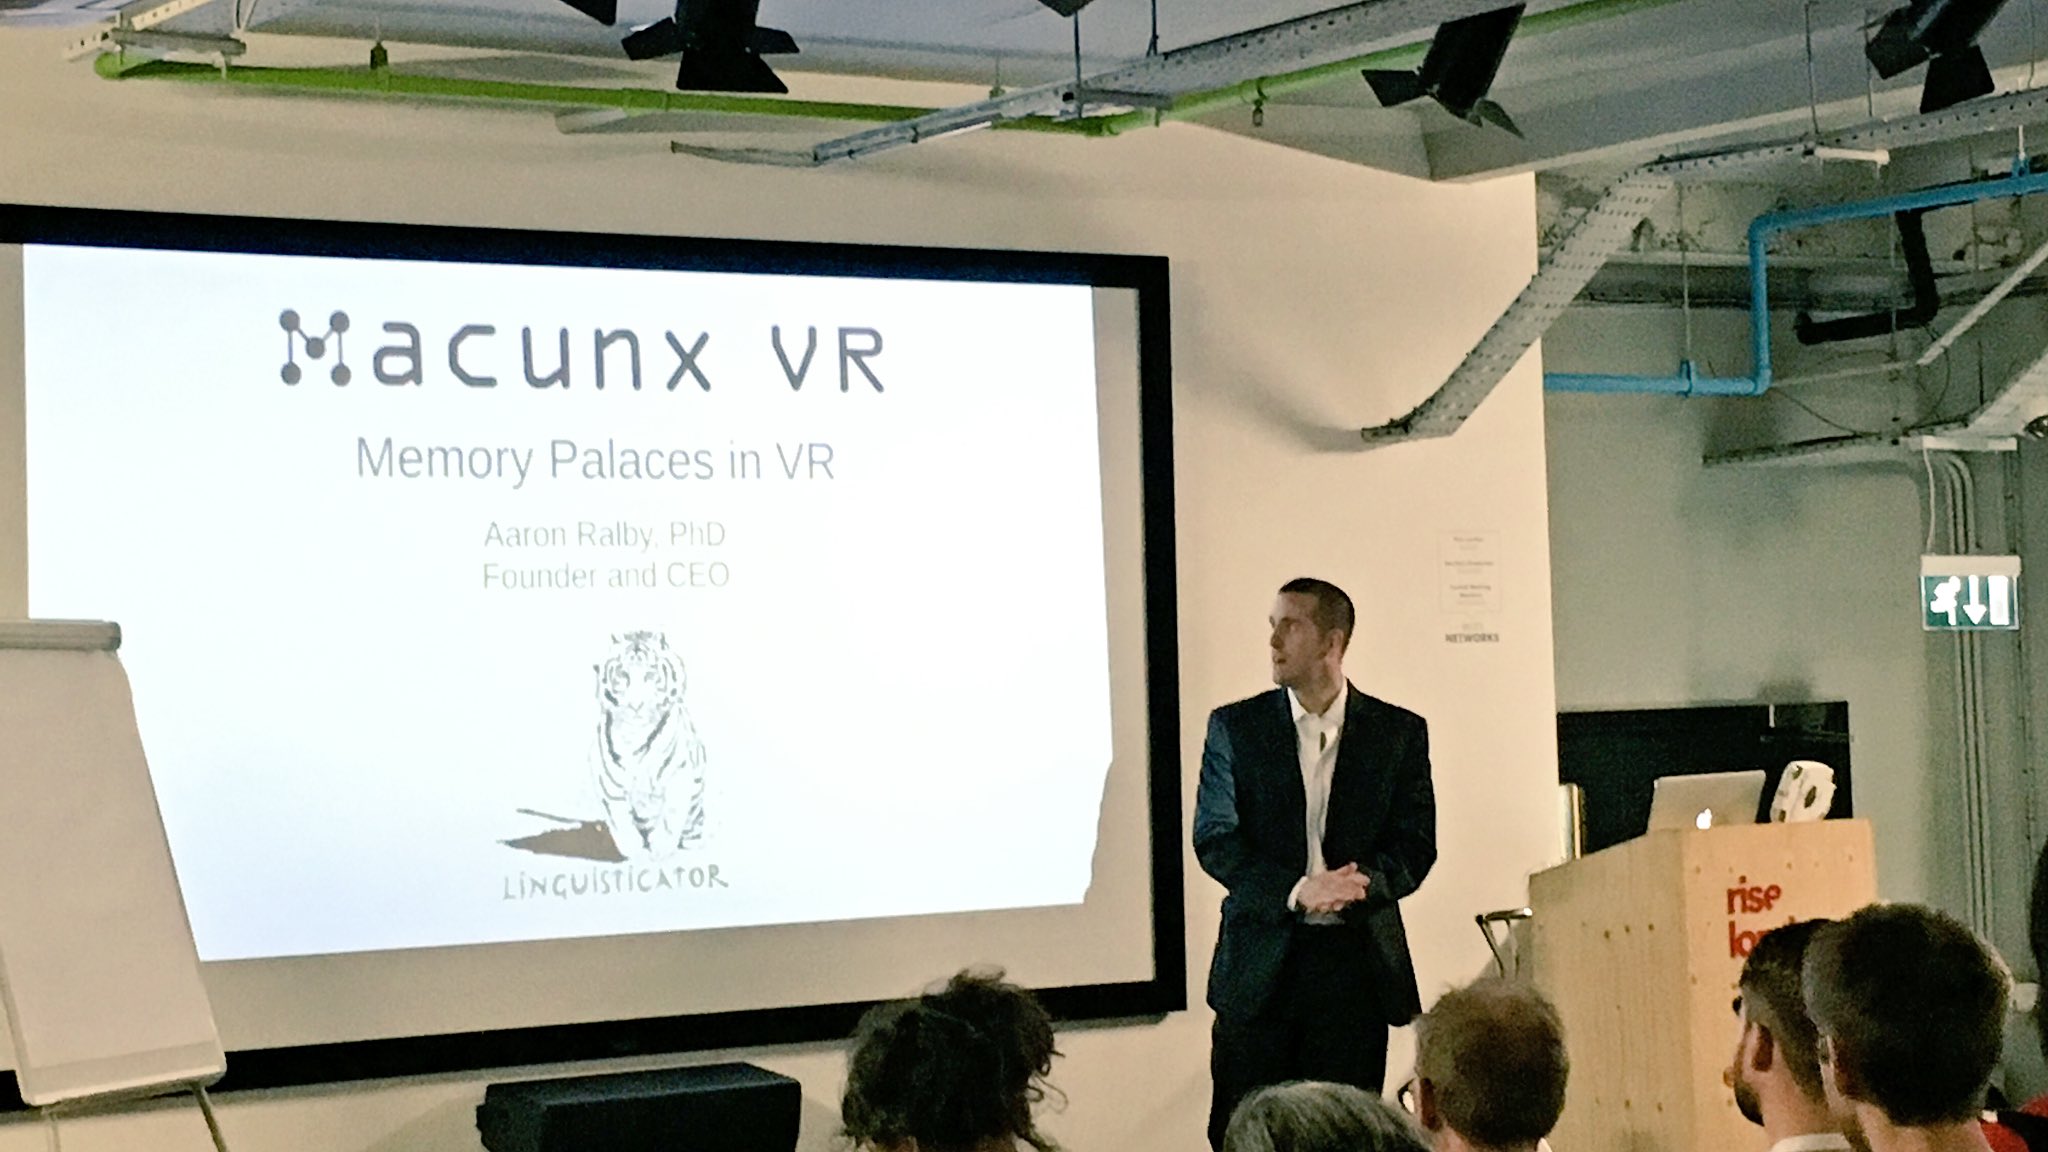 macunx vr visual learning platform armacunx4